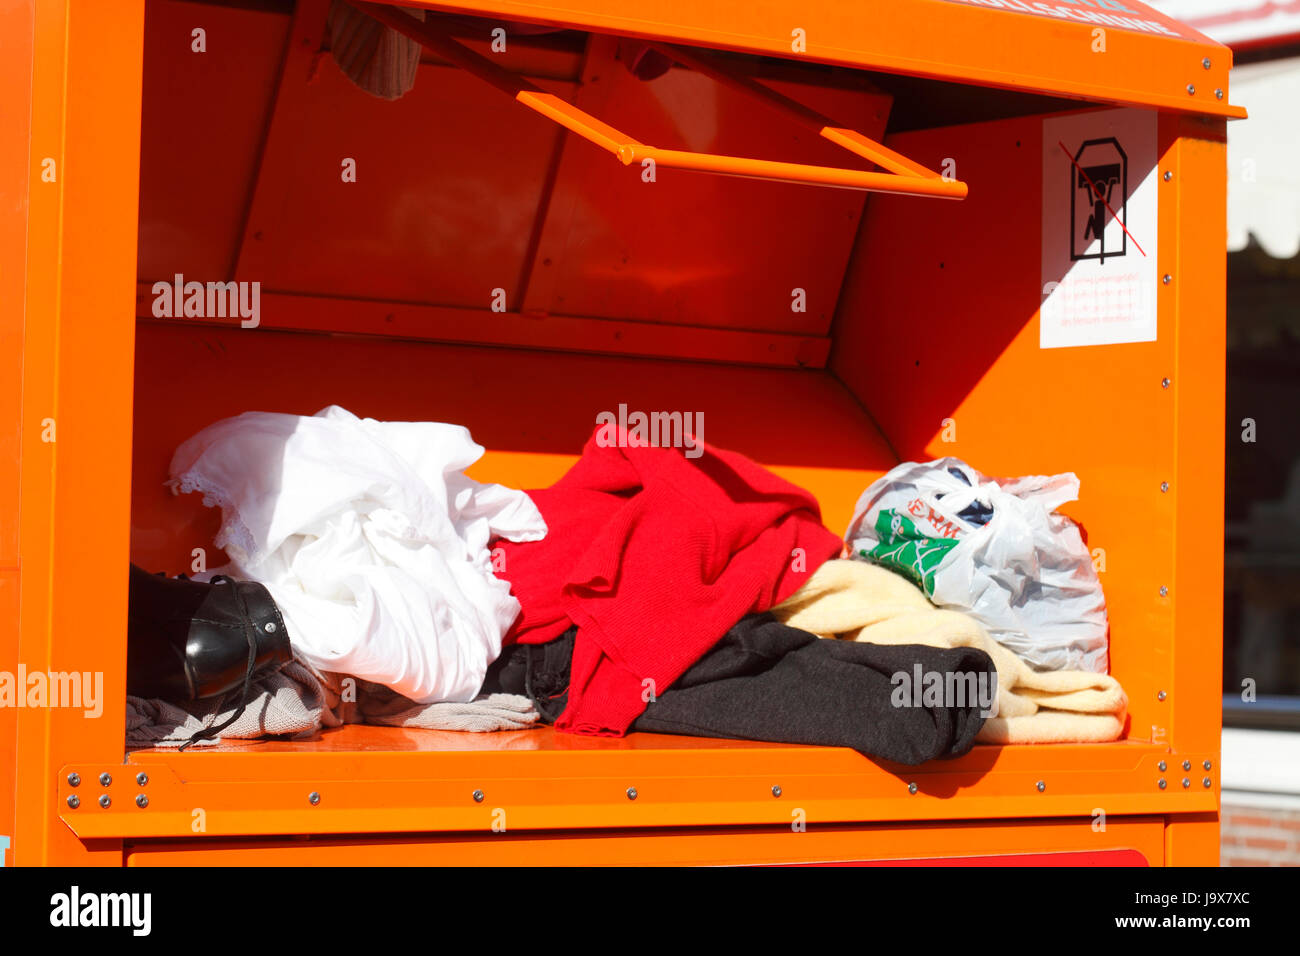 Old clothes collection, Container Stock Photo